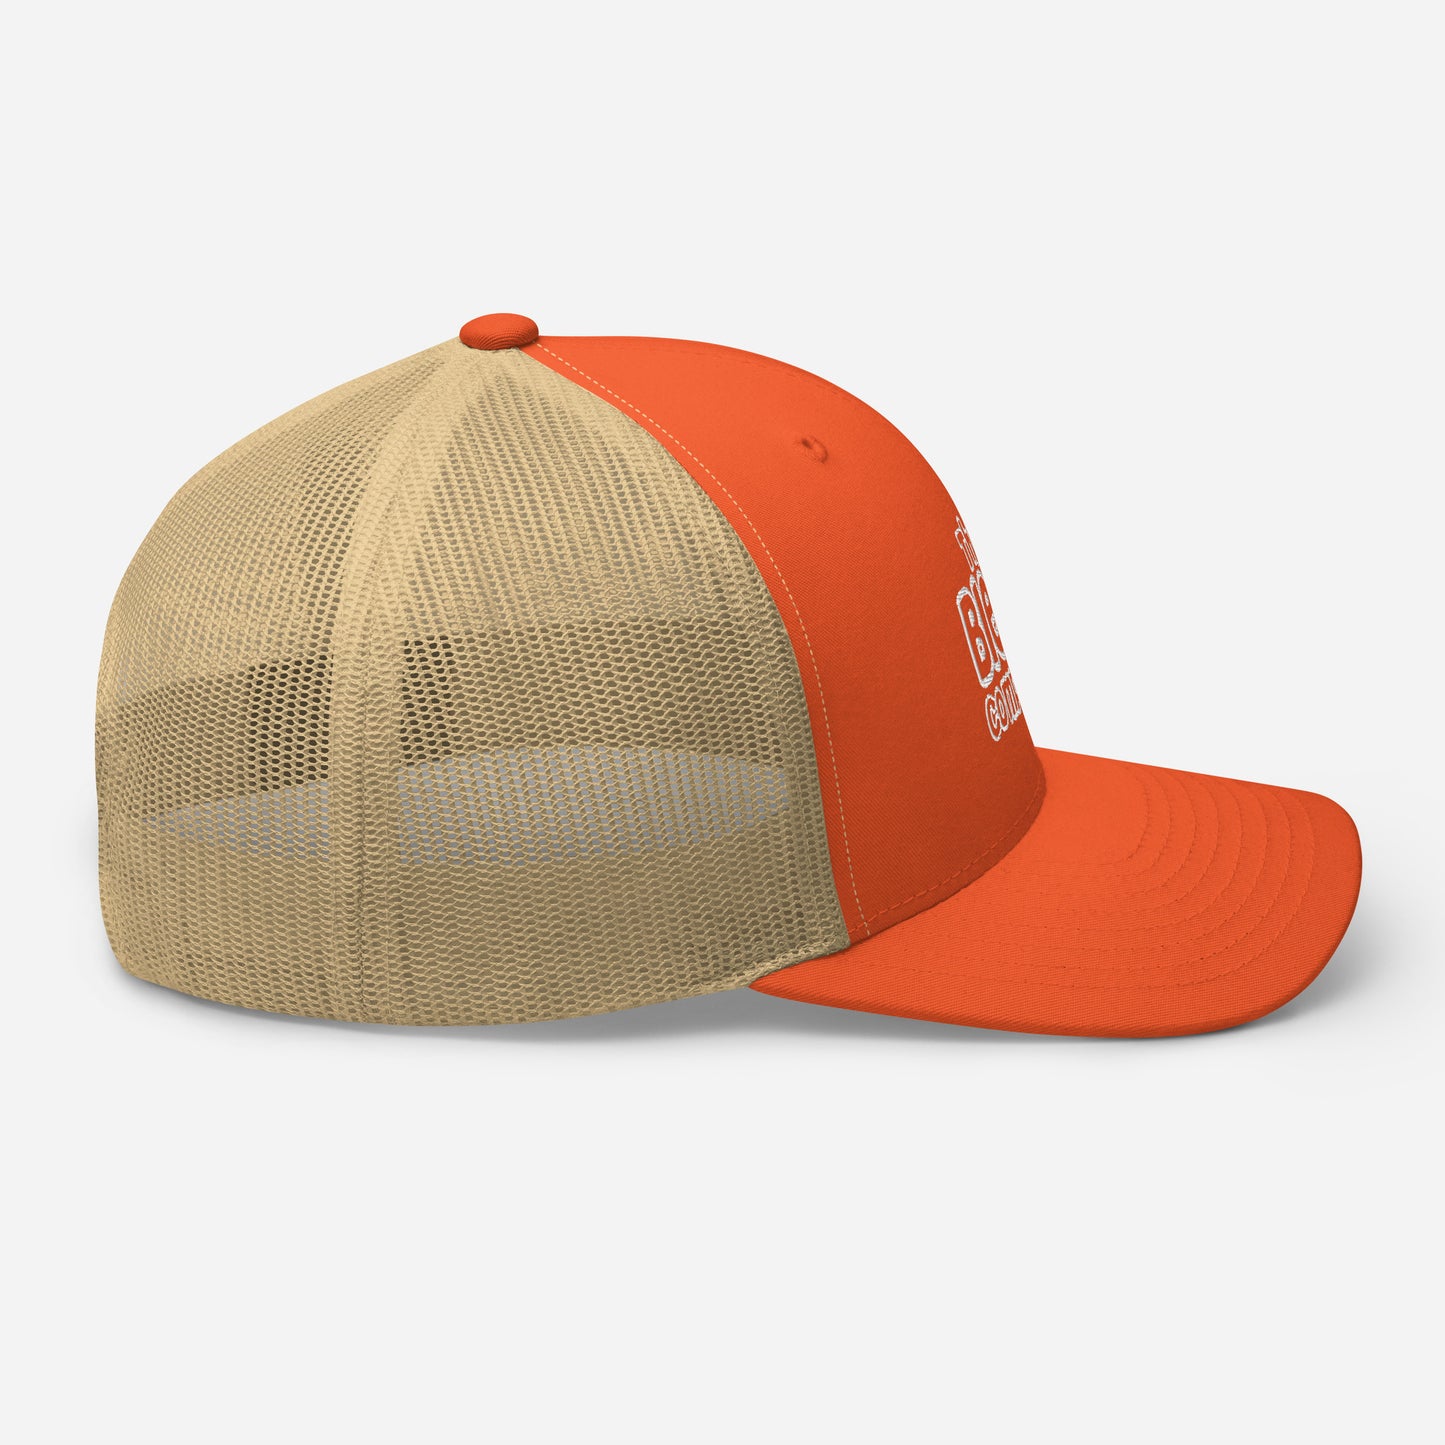 The Blend Compadres Trucker Cap - Another Bodega